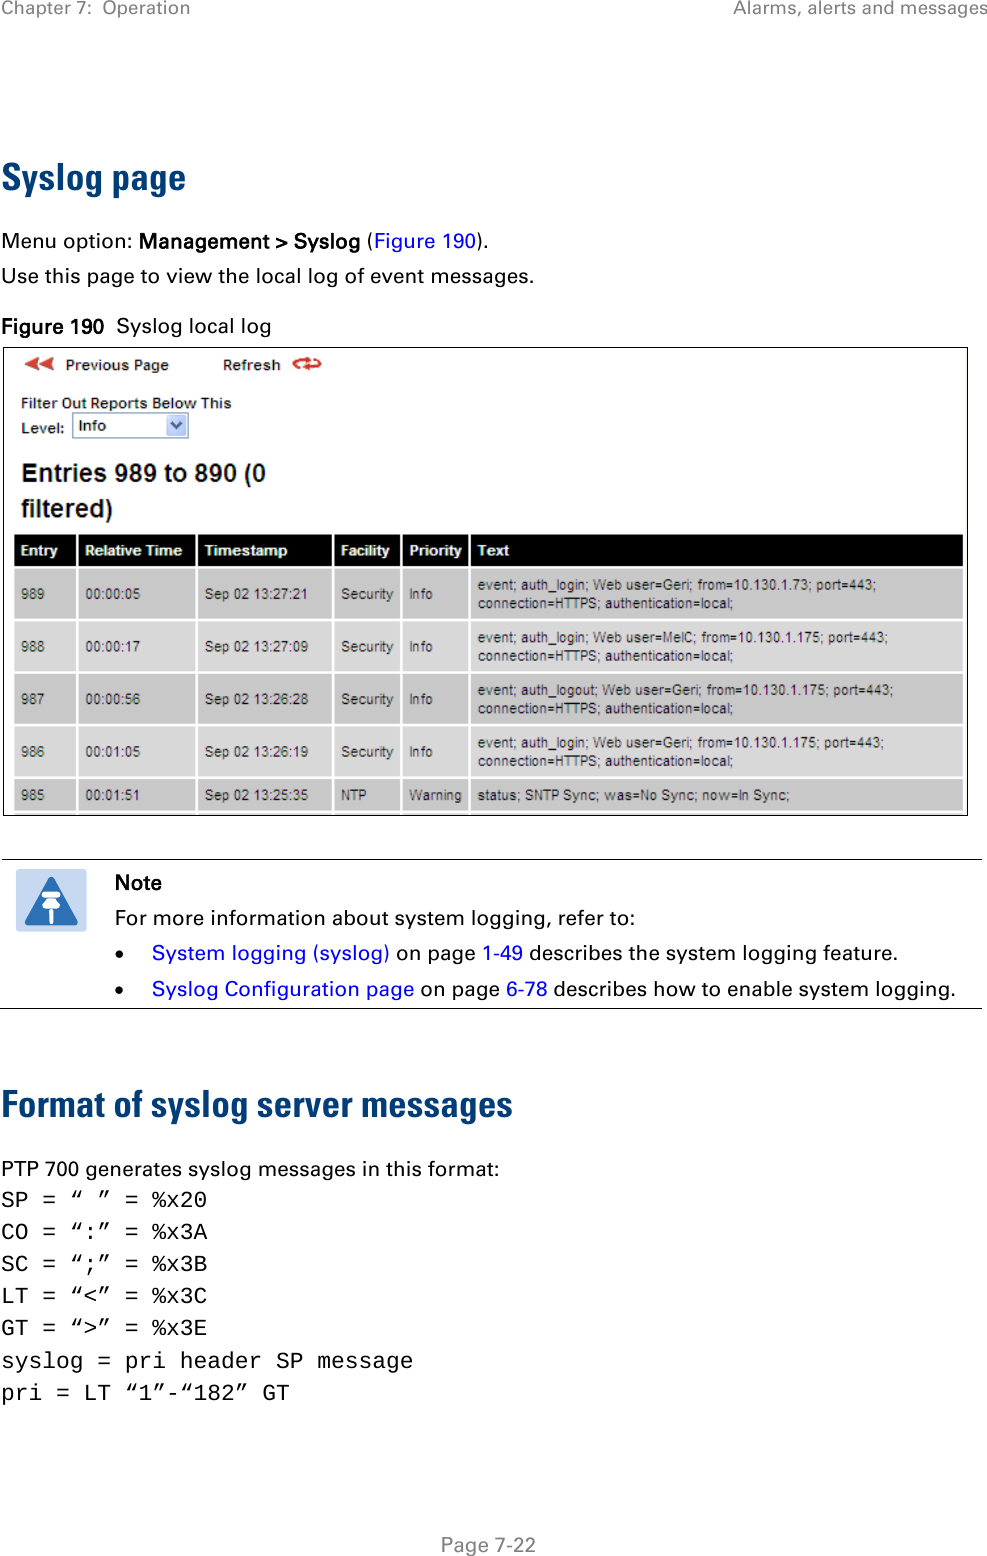 Chapter 7:  Operation Alarms, alerts and messages   Syslog page Menu option: Management &gt; Syslog (Figure 190). Use this page to view the local log of event messages. Figure 190  Syslog local log    Note For more information about system logging, refer to: • System logging (syslog) on page 1-49 describes the system logging feature. • Syslog Configuration page on page 6-78 describes how to enable system logging.  Format of syslog server messages PTP 700 generates syslog messages in this format: SP = “ ” = %x20 CO = “:” = %x3A SC = “;” = %x3B LT = “&lt;” = %x3C GT = “&gt;” = %x3E syslog = pri header SP message pri = LT “1”-“182” GT  Page 7-22 